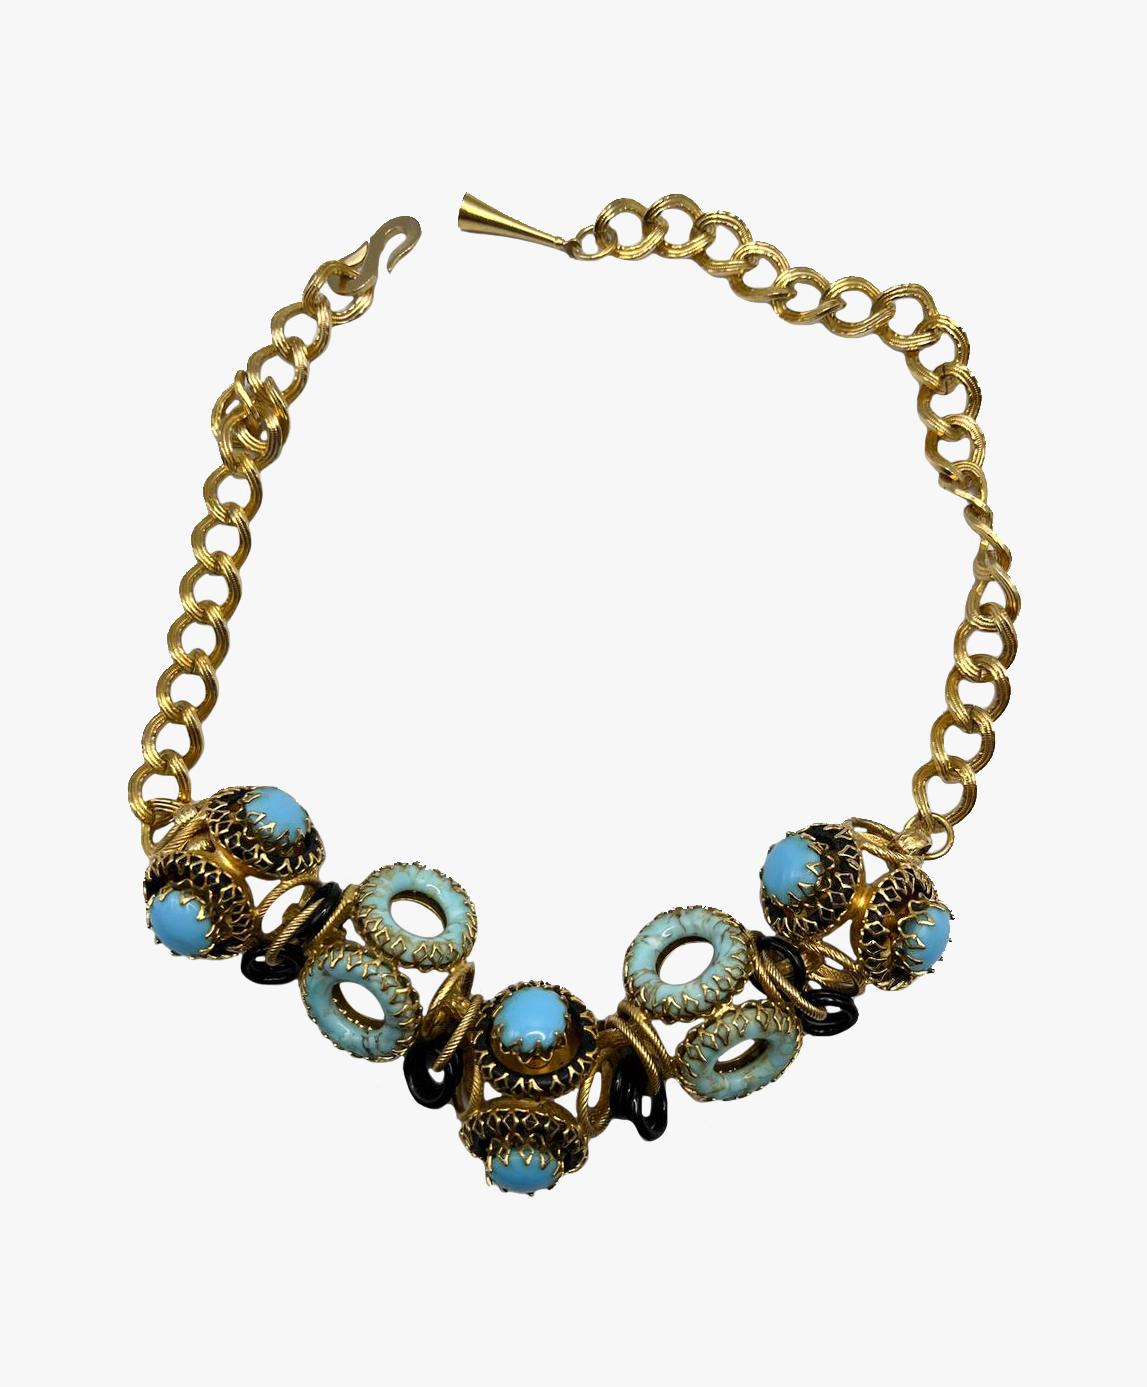 Henkel & Grosse Germany for Christian Dior necklace with blue turquoise glass showcased in golden hardware

Hook closure

Period – 1960’s

Unsigned

Length – 20” / 50cm

Condition – very good

........Additional information ........

- Photo might